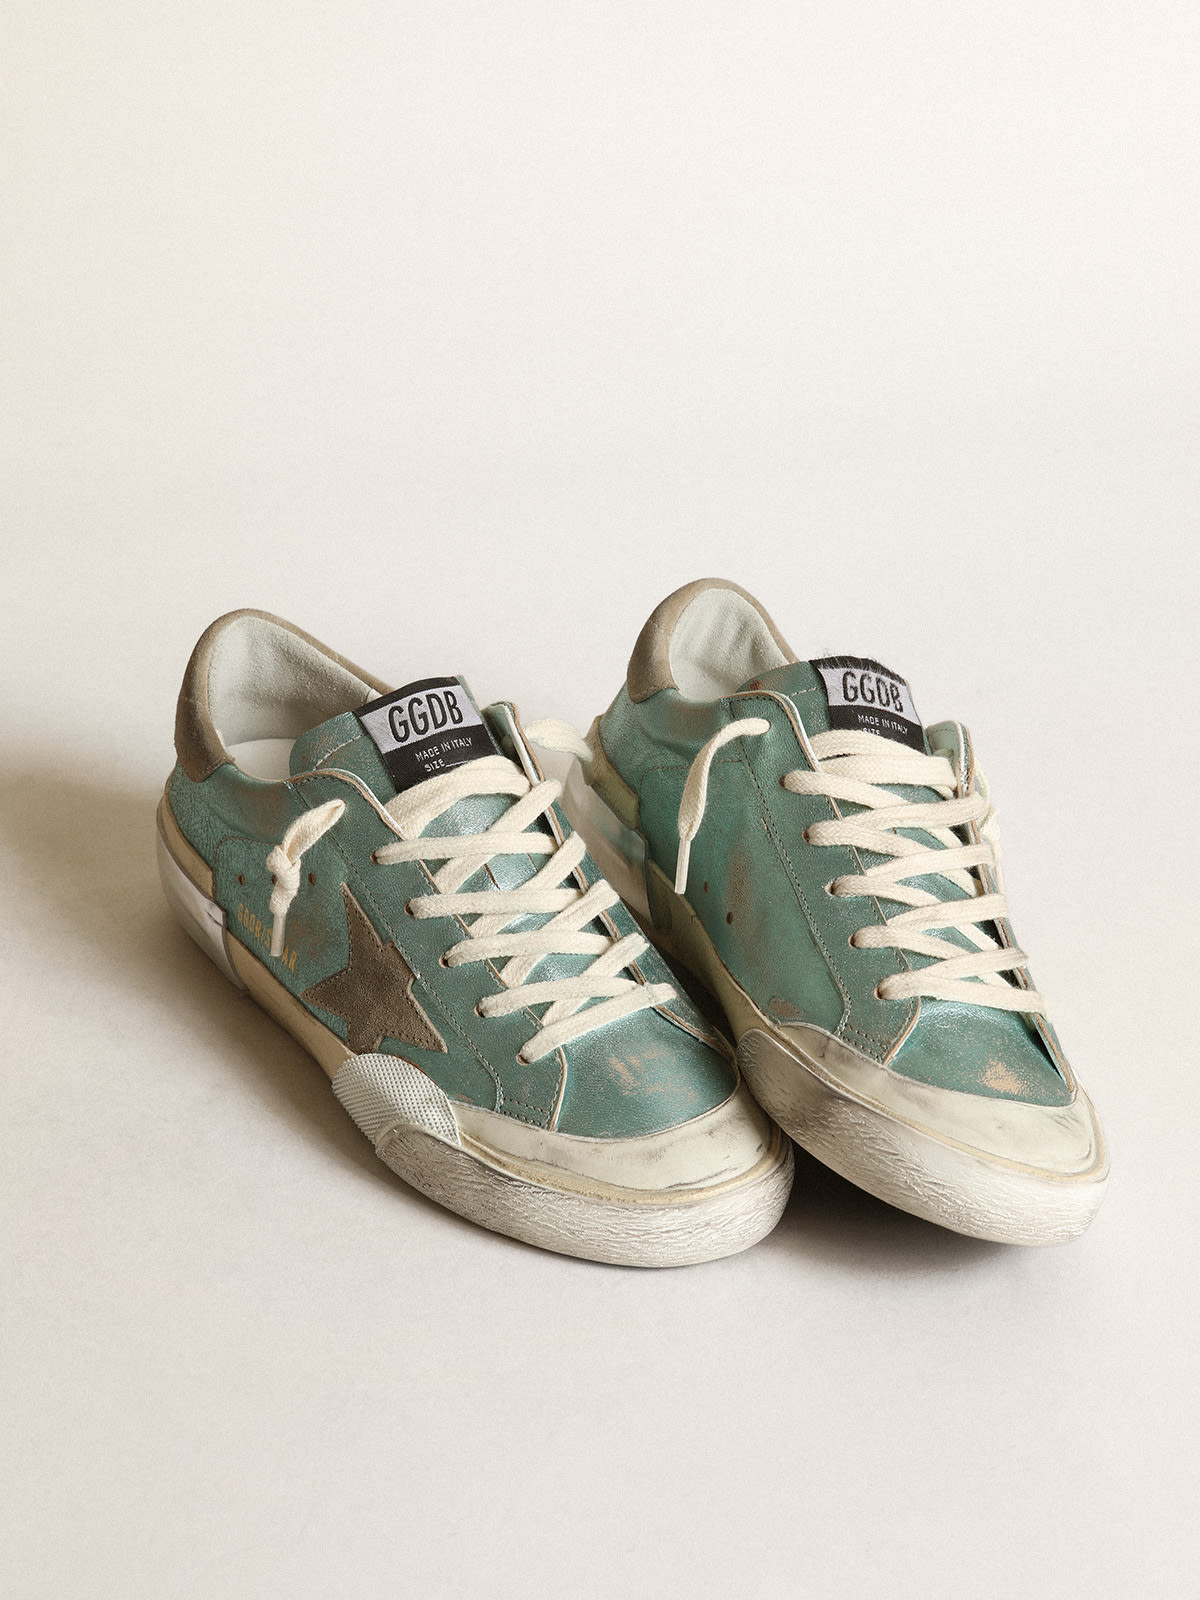 Golden Goose - Super-Star sneakers in mint-green laminated leather with ice-gray suede star and multi-foxing in 